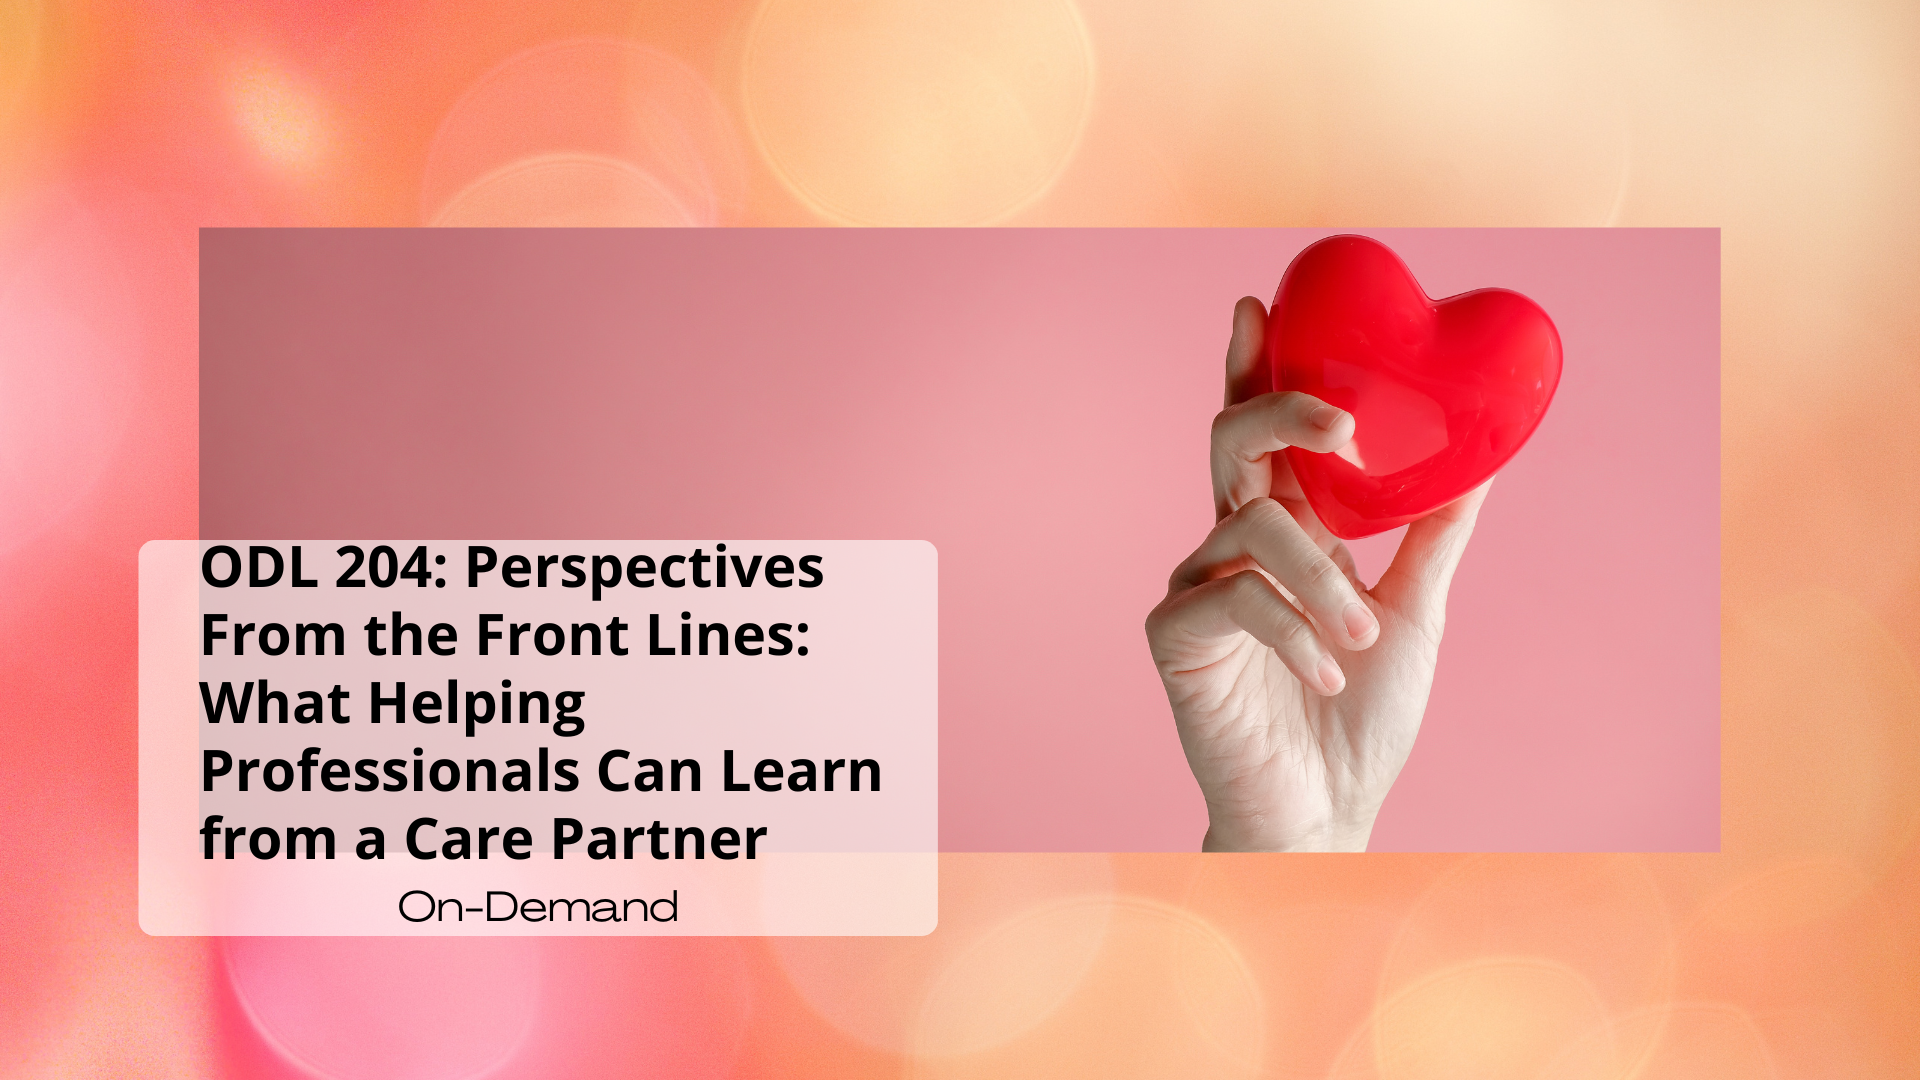 ODL 204: Perspectives From the Front Lines: What Helping Professionals Can Learn from a Care Partner